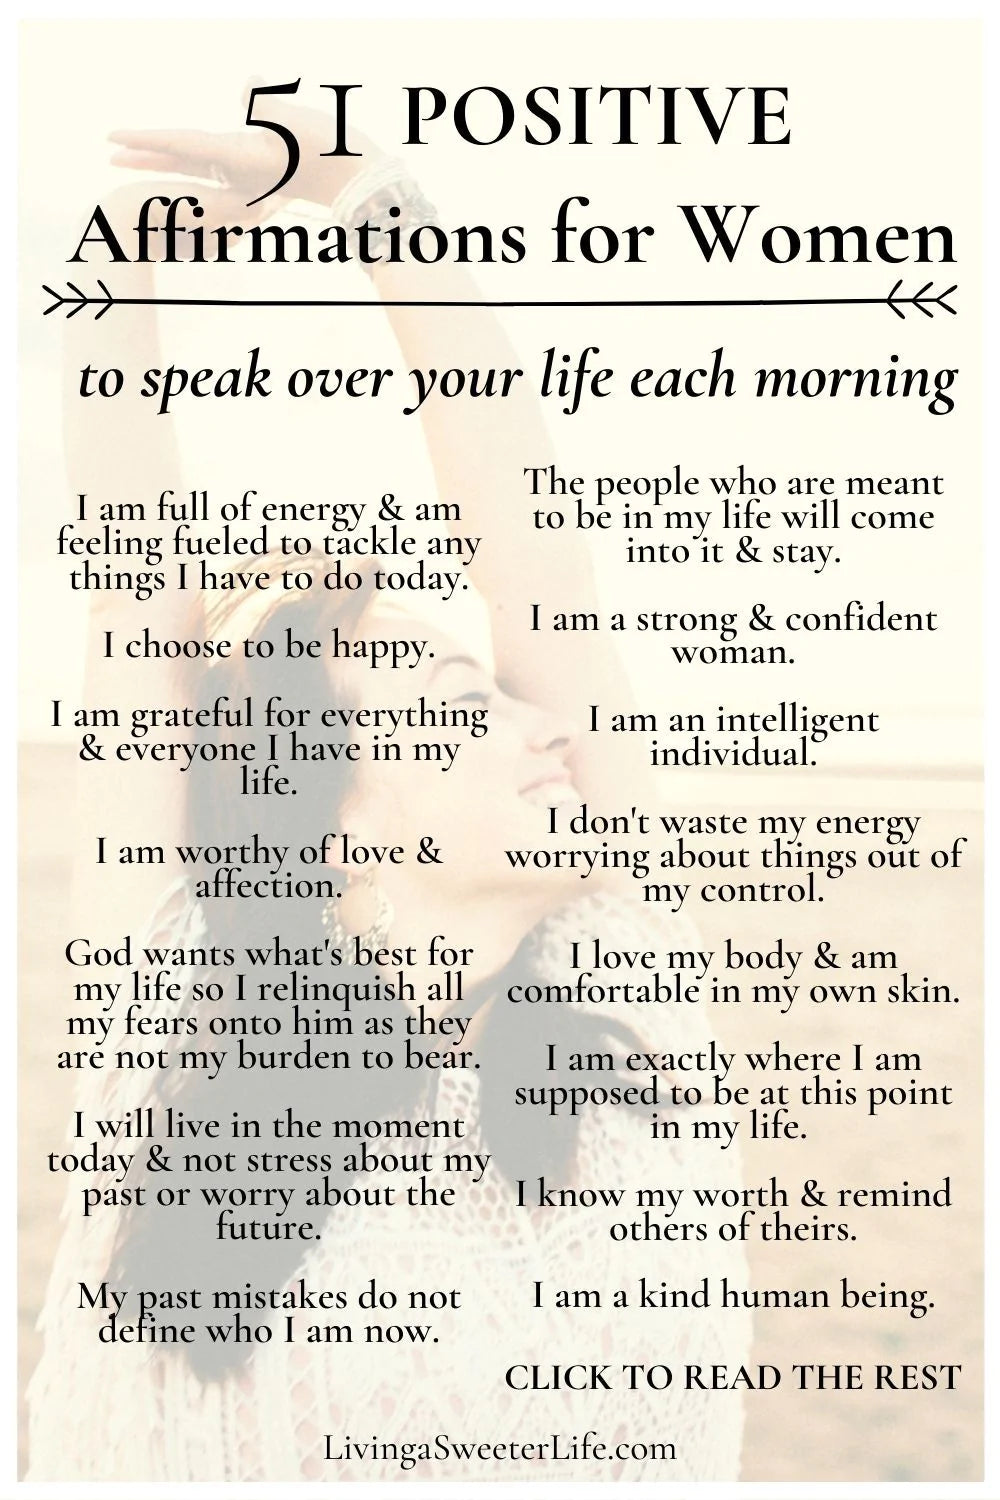 51 Positive Affirmations for Women to Start Your Day Right